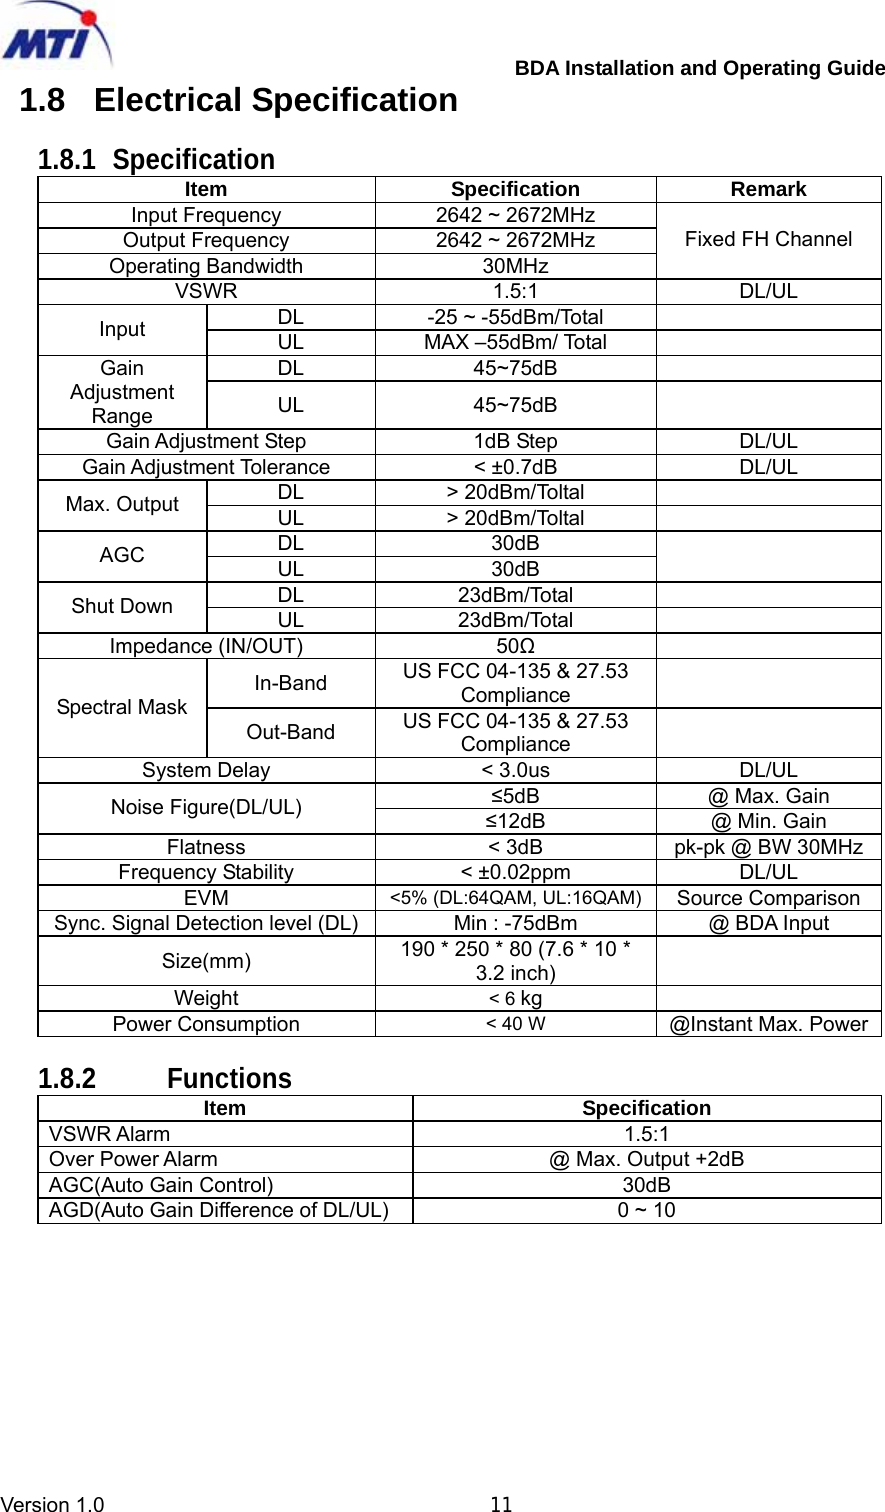         BDA Installation and Operating Guide Version 1.0                                       11 1.8 Electrical Specification  1.8.1 Specification Item  Specification  Remark Input Frequency  2642 ~ 2672MHz Output Frequency  2642 ~ 2672MHz Operating Bandwidth  30MHz Fixed FH Channel VSWR  1.5:1  DL/UL DL  -25 ~ -55dBm/Total   Input  UL MAX –55dBm/ Total  DL  45~75dB   Gain Adjustment Range  UL 45~75dB  Gain Adjustment Step  1dB Step  DL/UL Gain Adjustment Tolerance  &lt; ±0.7dB  DL/UL DL  &gt; 20dBm/Toltal   Max. Output  UL &gt; 20dBm/Toltal  DL  30dB AGC  UL 30dB  DL  23dBm/Total   Shut Down  UL 23dBm/Total  Impedance (IN/OUT)  50Ω   In-Band  US FCC 04-135 &amp; 27.53 Compliance   Spectral MaskOut-Band US FCC 04-135 &amp; 27.53 Compliance  System Delay  &lt; 3.0us  DL/UL ≤5dB  @ Max. Gain Noise Figure(DL/UL)  ≤12dB  @ Min. Gain Flatness  &lt; 3dB  pk-pk @ BW 30MHzFrequency Stability  &lt; ±0.02ppm  DL/UL EVM  &lt;5% (DL:64QAM, UL:16QAM) Source Comparison Sync. Signal Detection level (DL) Min : -75dBm  @ BDA Input Size(mm)  190 * 250 * 80 (7.6 * 10 * 3.2 inch)   Weight  &lt; 6 kg   Power Consumption  &lt; 40 W @Instant Max. Power 1.8.2 Functions Item  Specification VSWR Alarm  1.5:1 Over Power Alarm  @ Max. Output +2dB AGC(Auto Gain Control)  30dB AGD(Auto Gain Difference of DL/UL)  0 ~ 10 